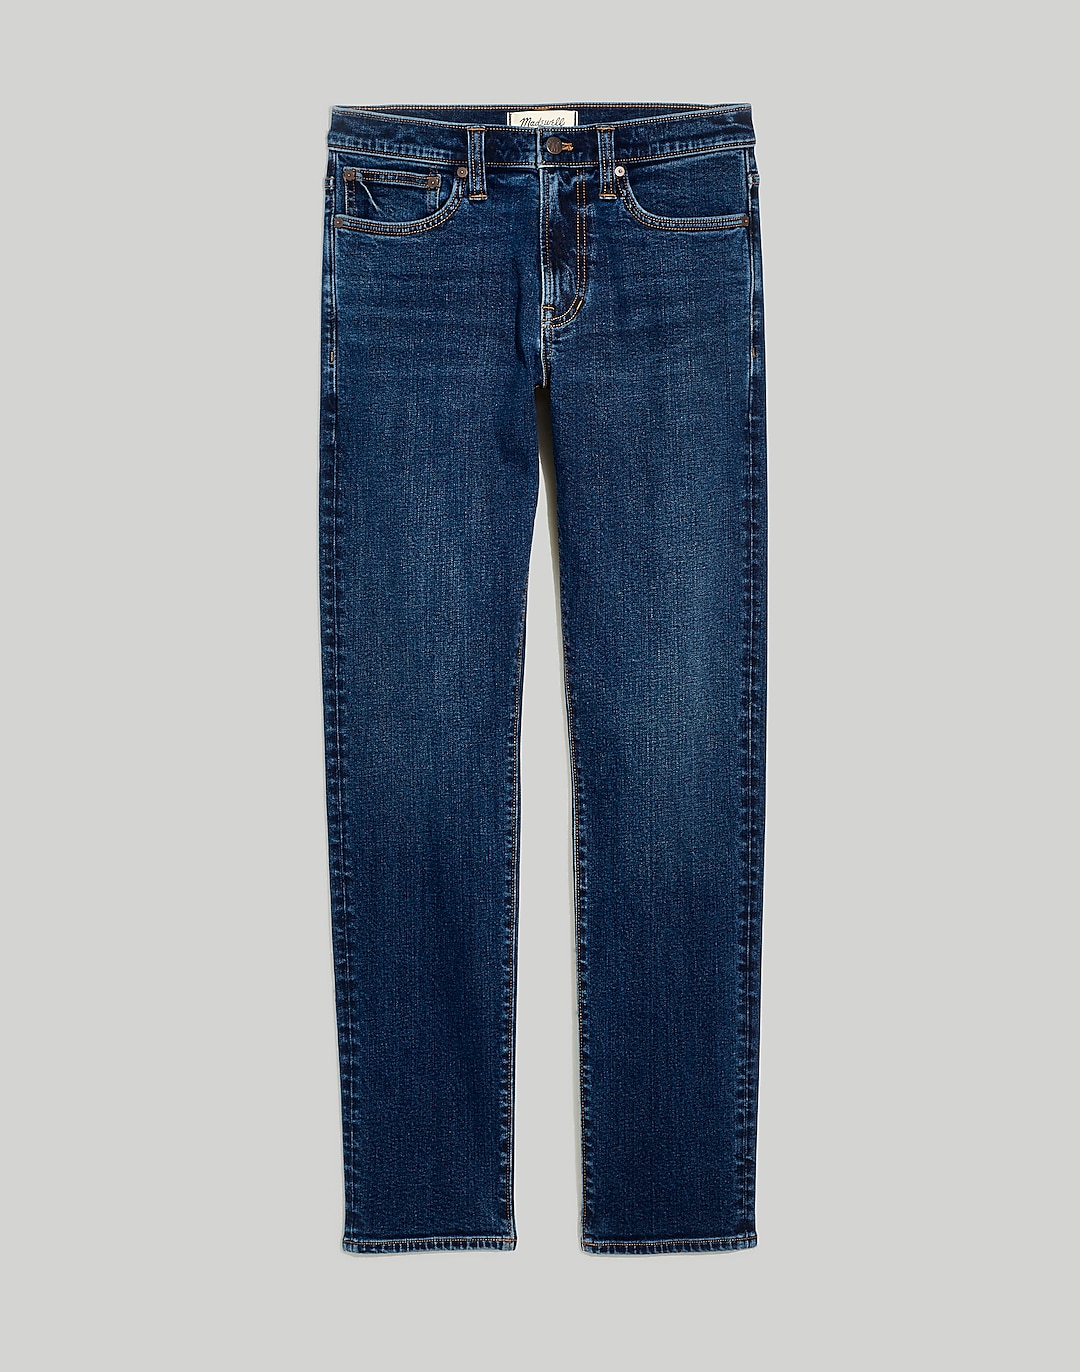 Jeans Milford Wash: Instacozy in Edition Slim